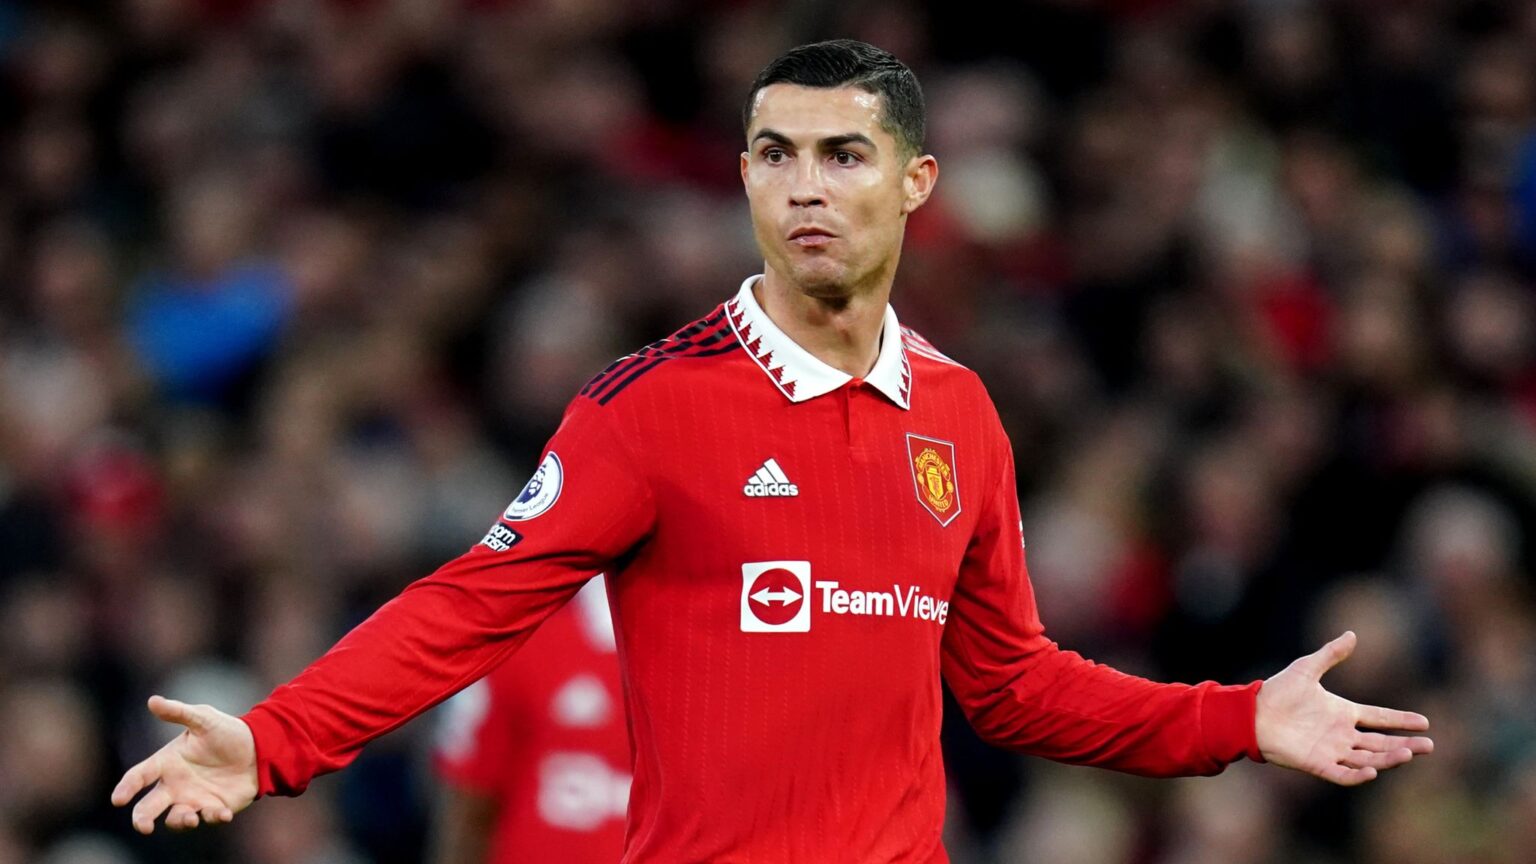 Cristiano Ronaldo says Glazers don't care about Manchester United